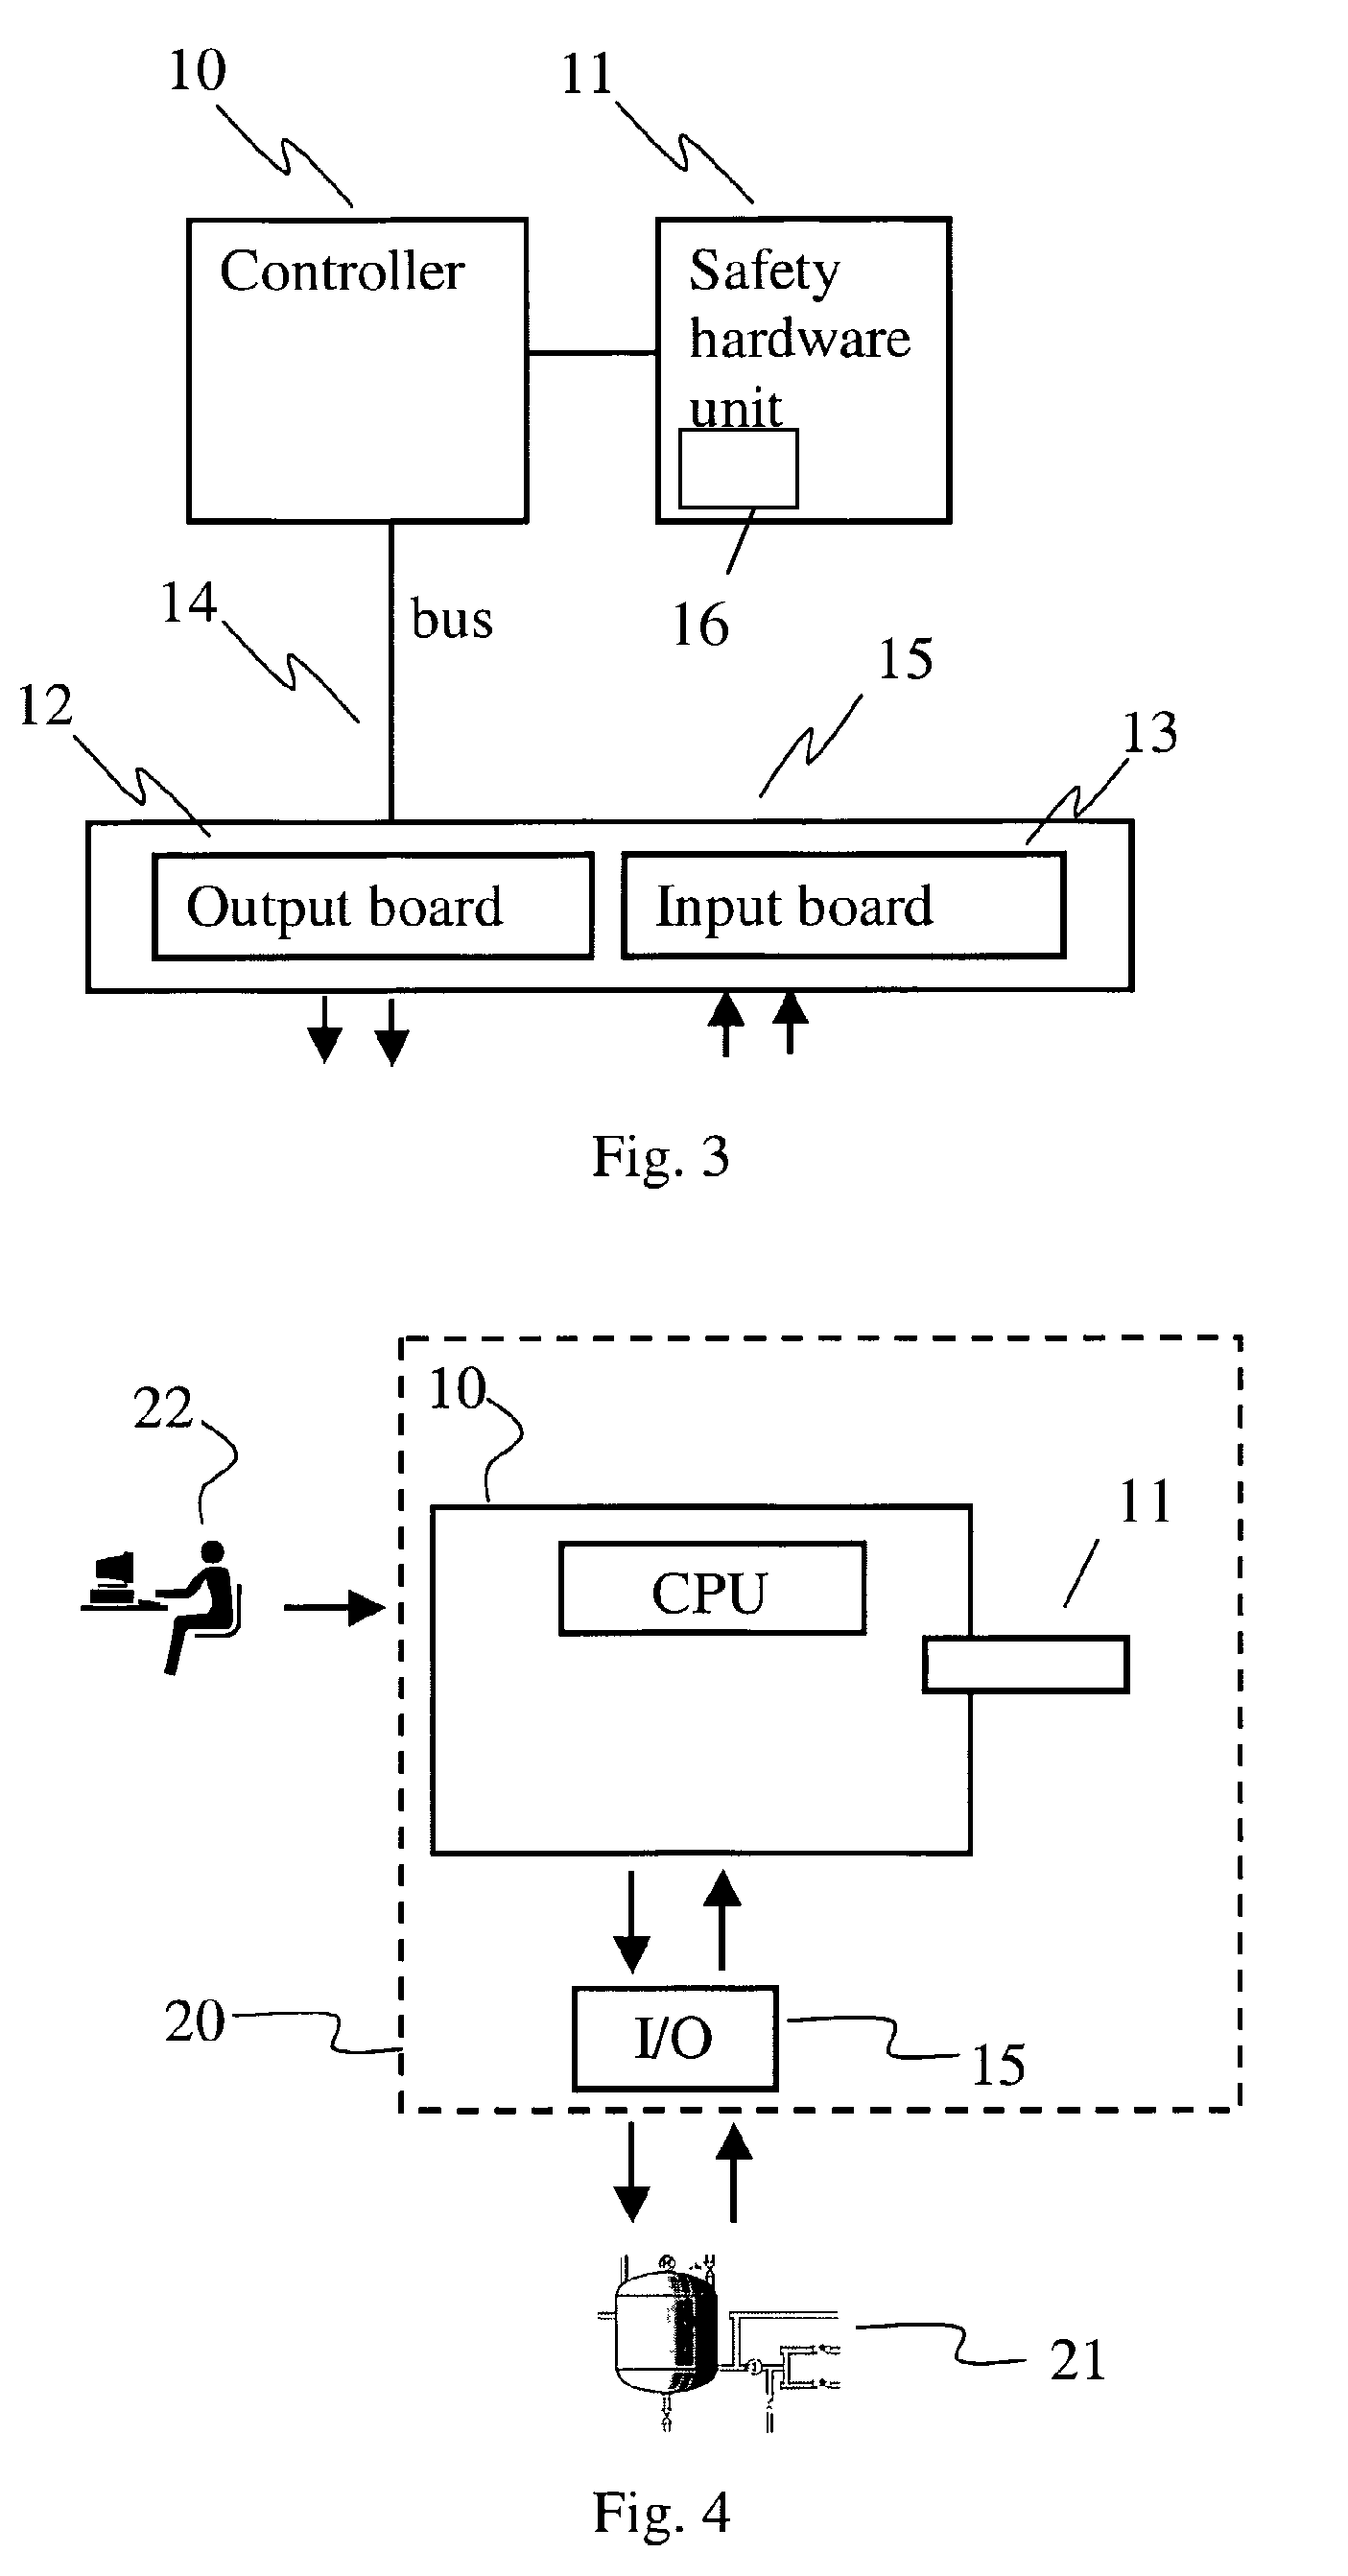 Method to increase the safety integrity level of a control system